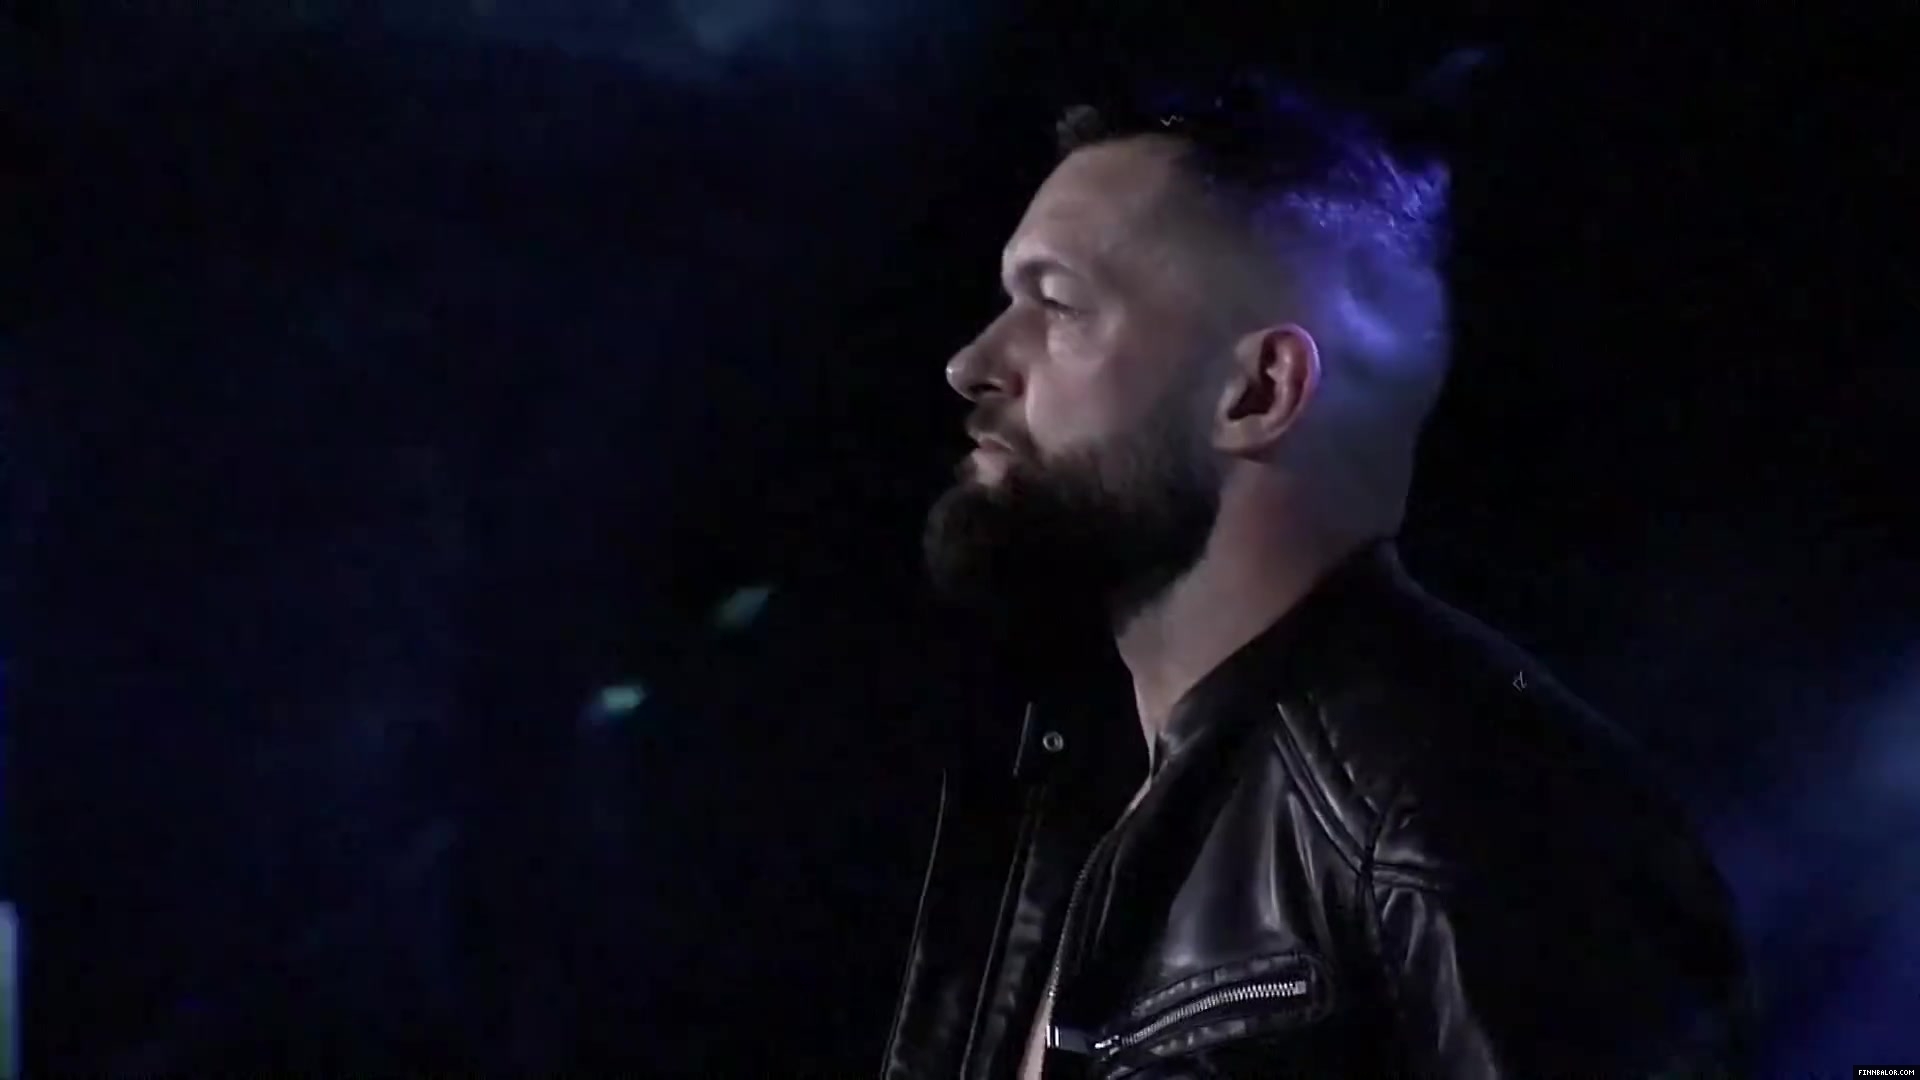 Finn_Balor___The_Rising_of_the_Prince_in_NXT_202.jpg